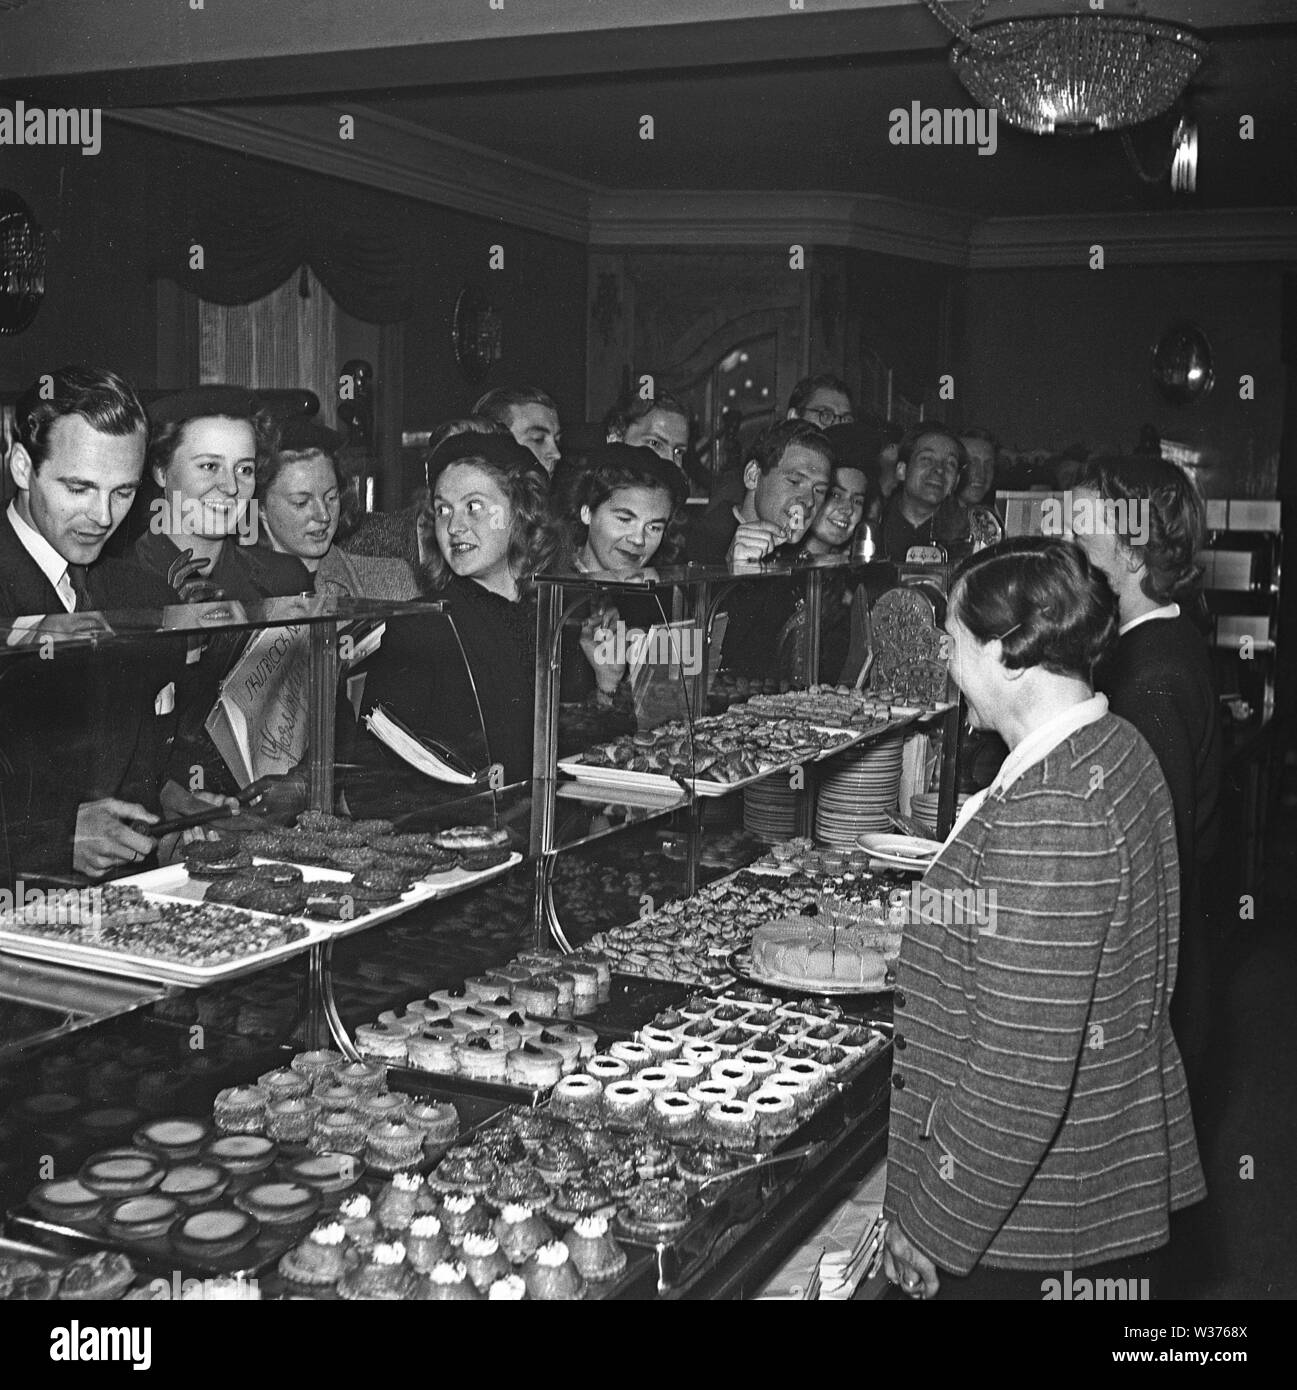 1940s coffee shop and fika time. Two women are standing behind the counter that is packed full with freshly baked cakes and pastries. A crowd of people are standing in line to order.  Sweden 1943 Kristoffersson Ref E126-2 Stock Photo